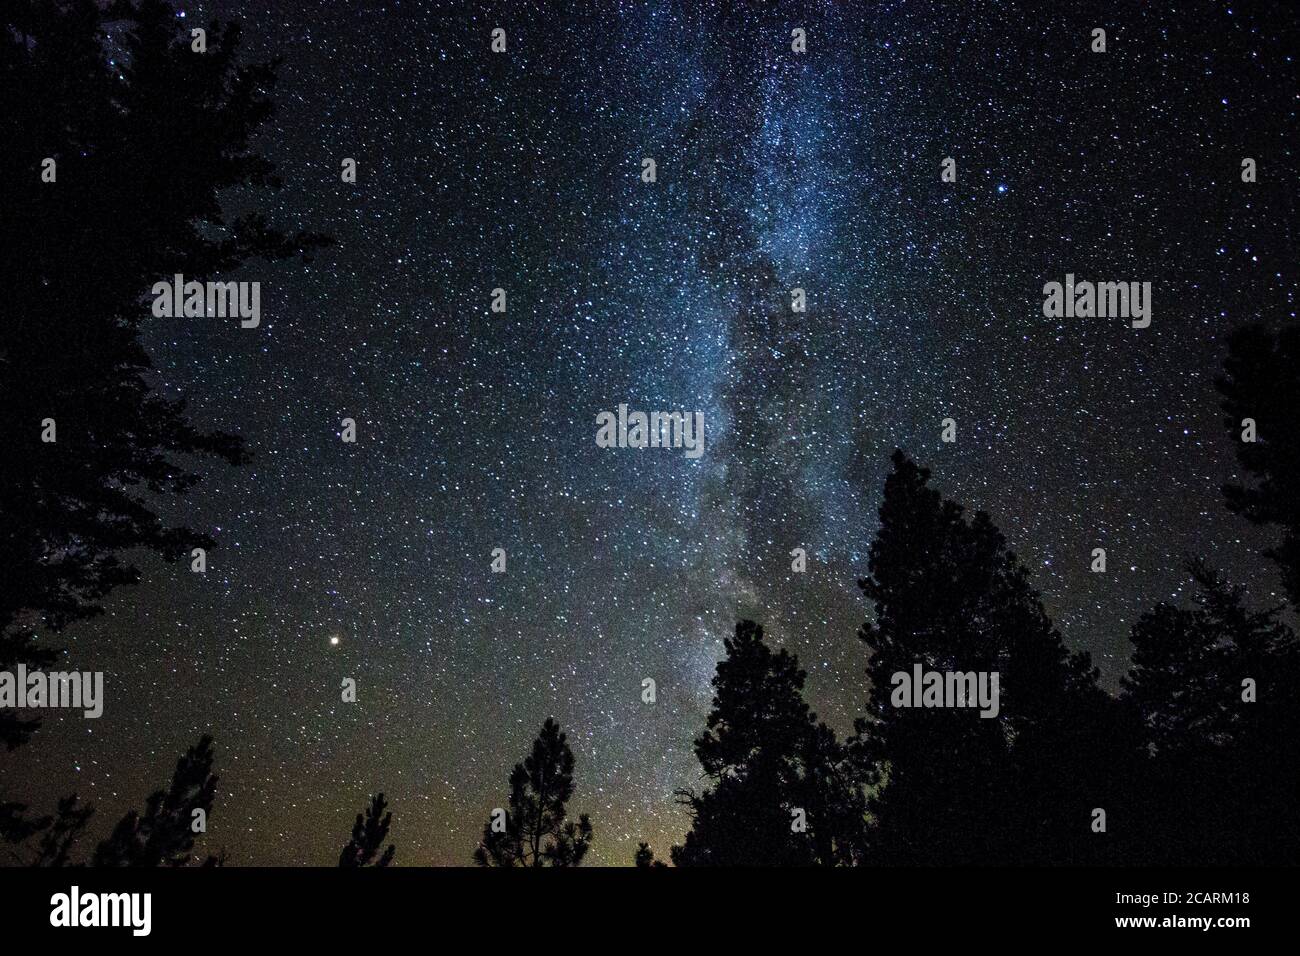 Infinite starry sky with milky way in a Washington state forest with Mars in the distance. Stock Photo